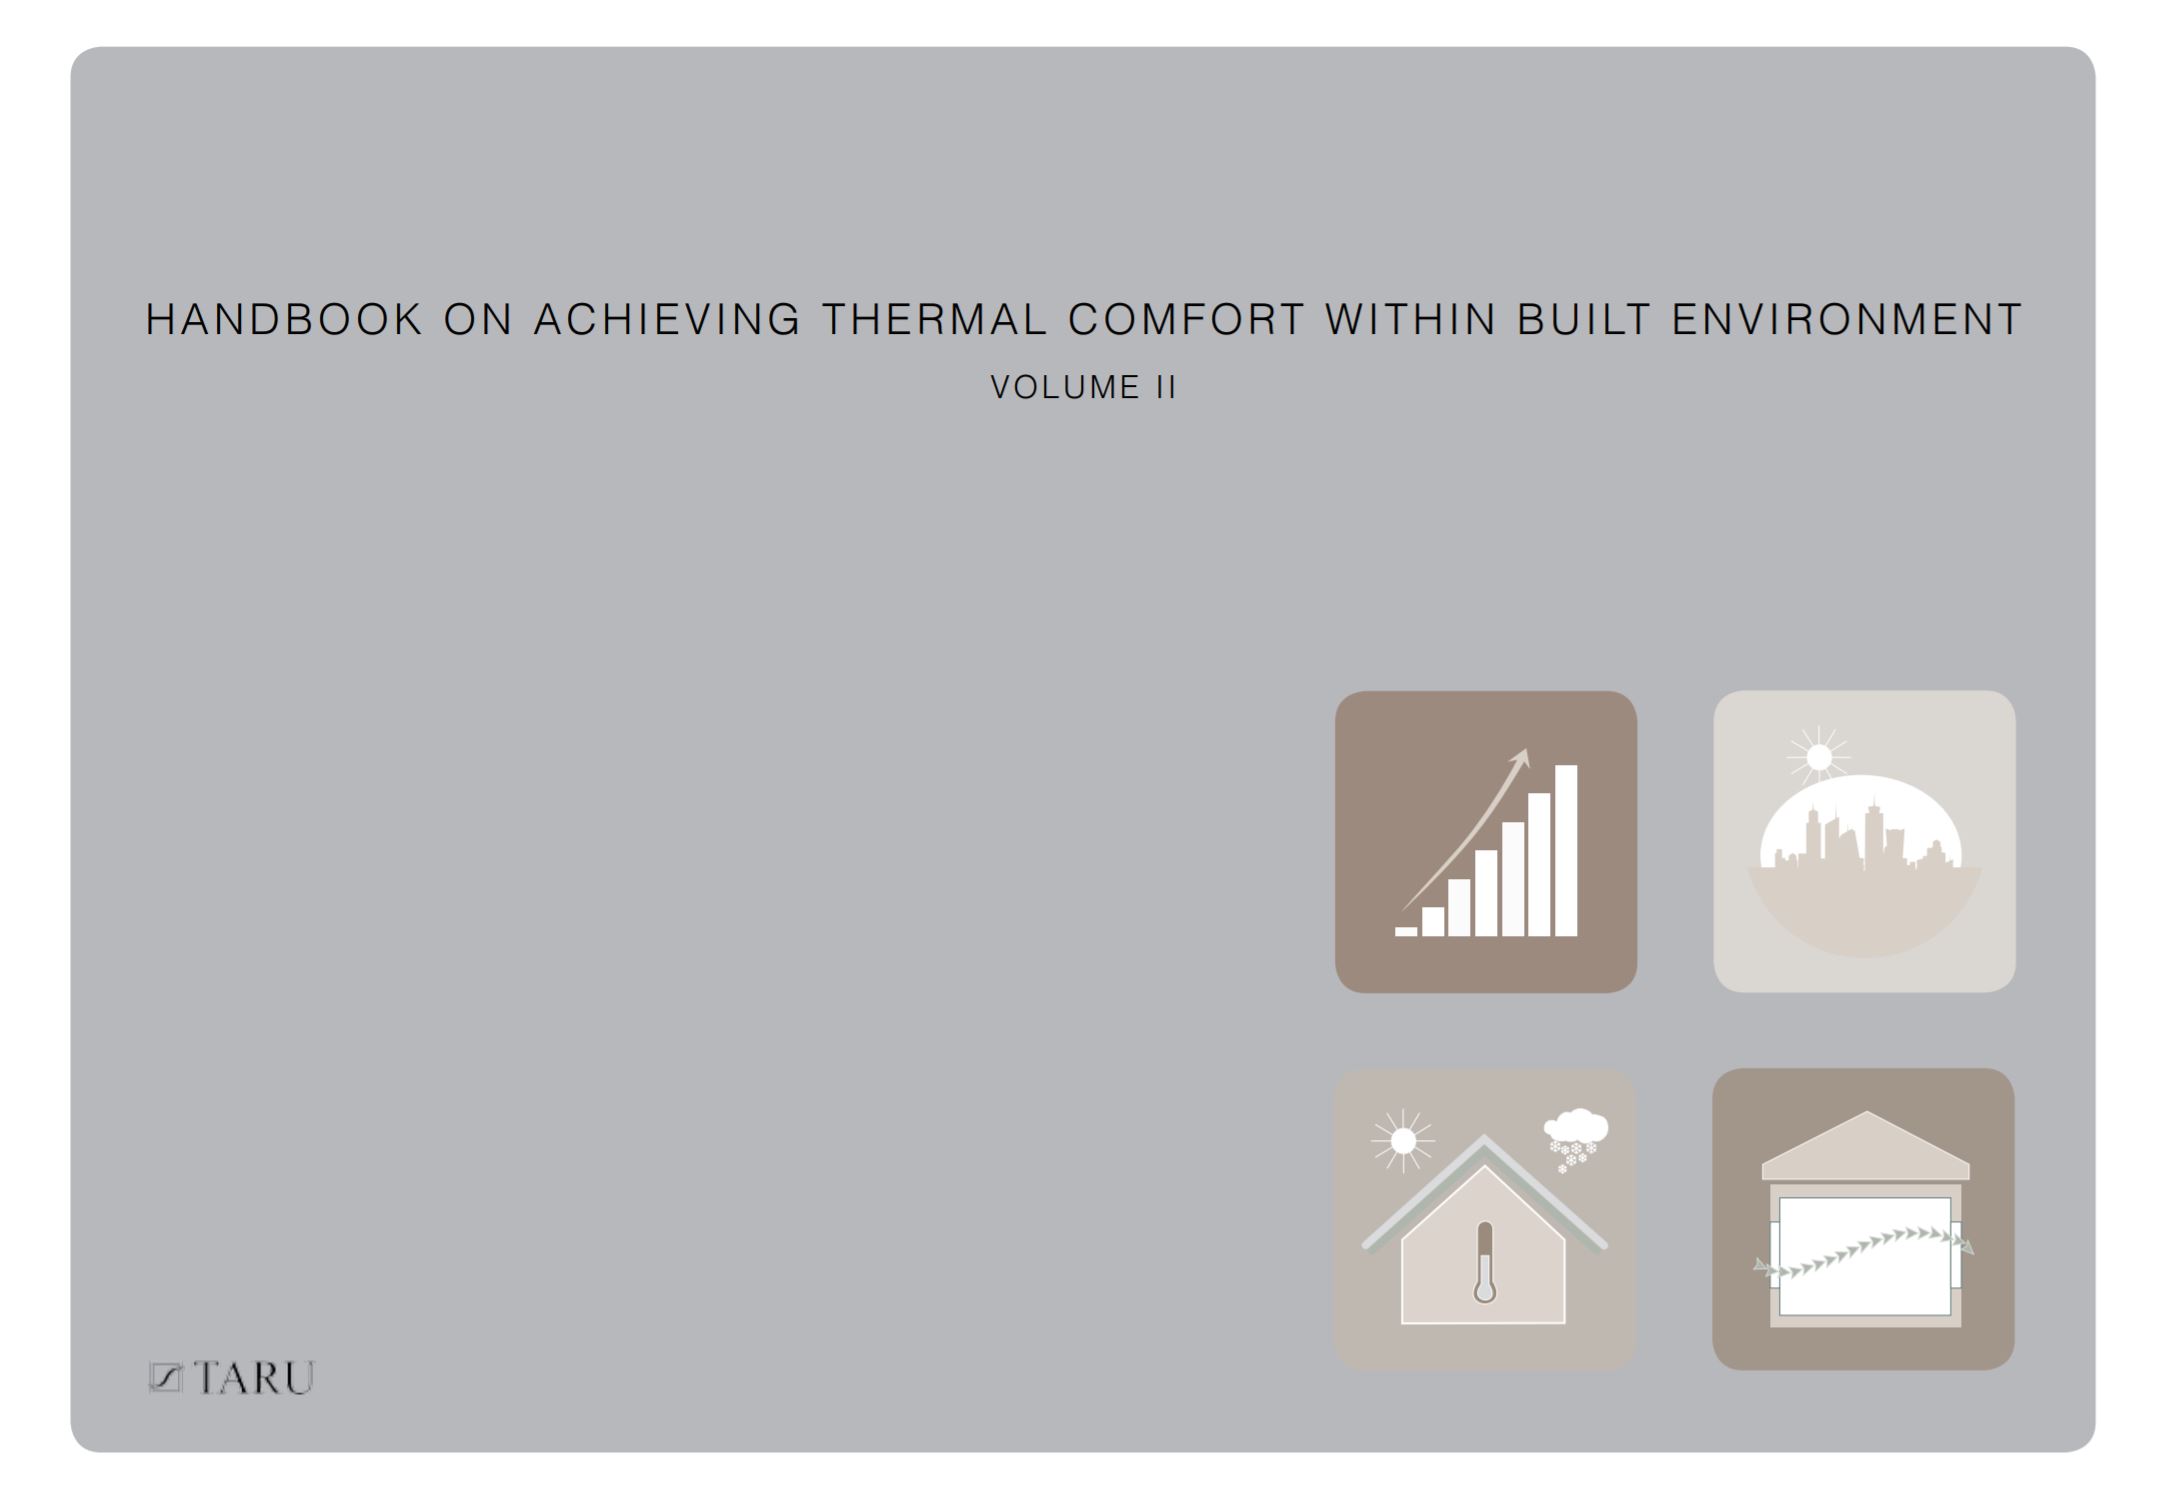 Handbook on achieving thermal comfort within the built environment Volume 2